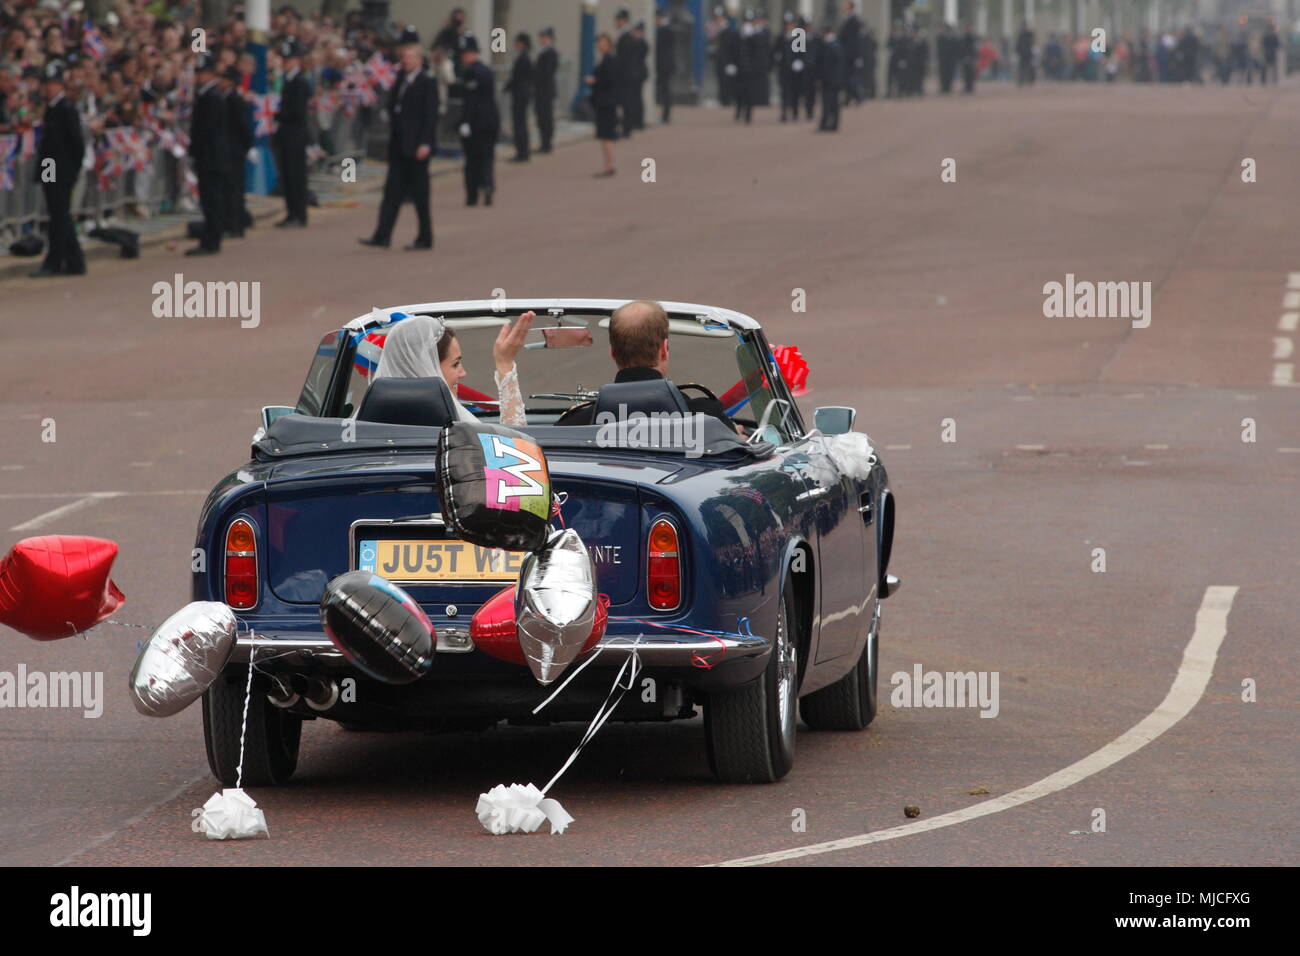 UK - Royal Wedding of Prince William and Kate (Catherine) Middleton - newlyweds William and Kate driving in an open top vintage Aston Martin Volante car along the Mall from  Buckingham Palace 29th April 2011 London UK Stock Photo